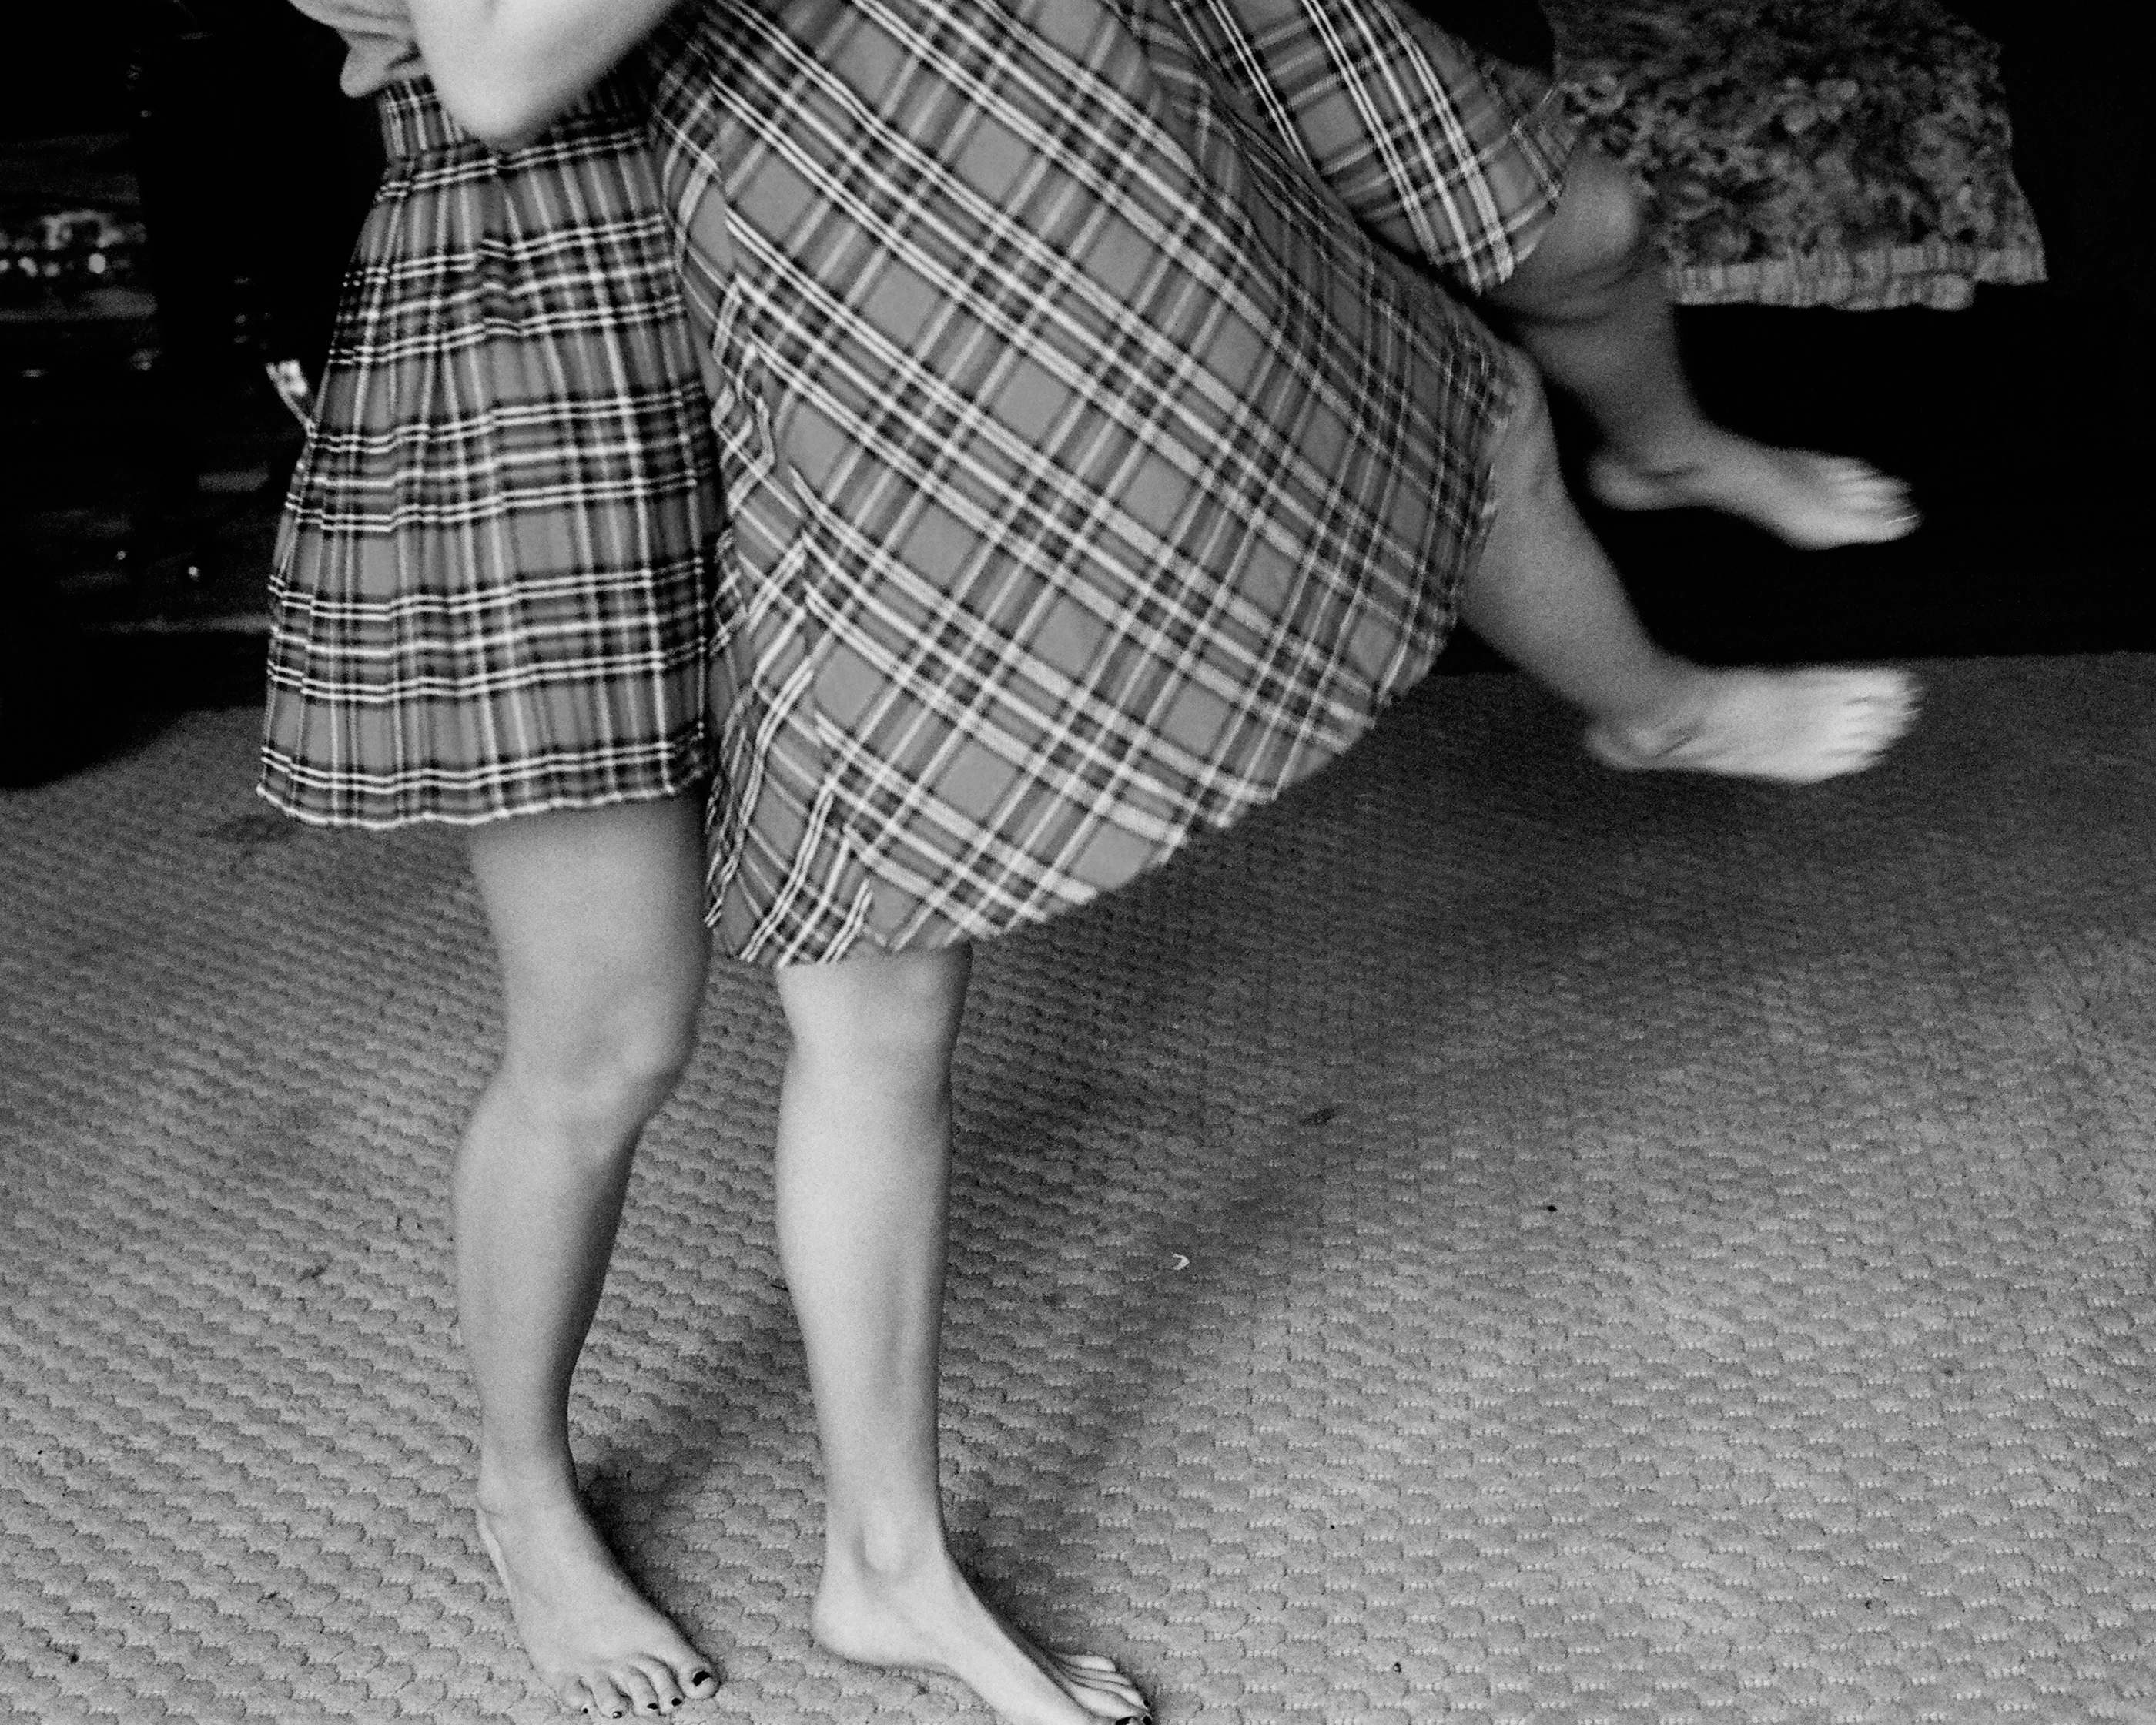 black-and-white image of girls in plaid skirts dancing